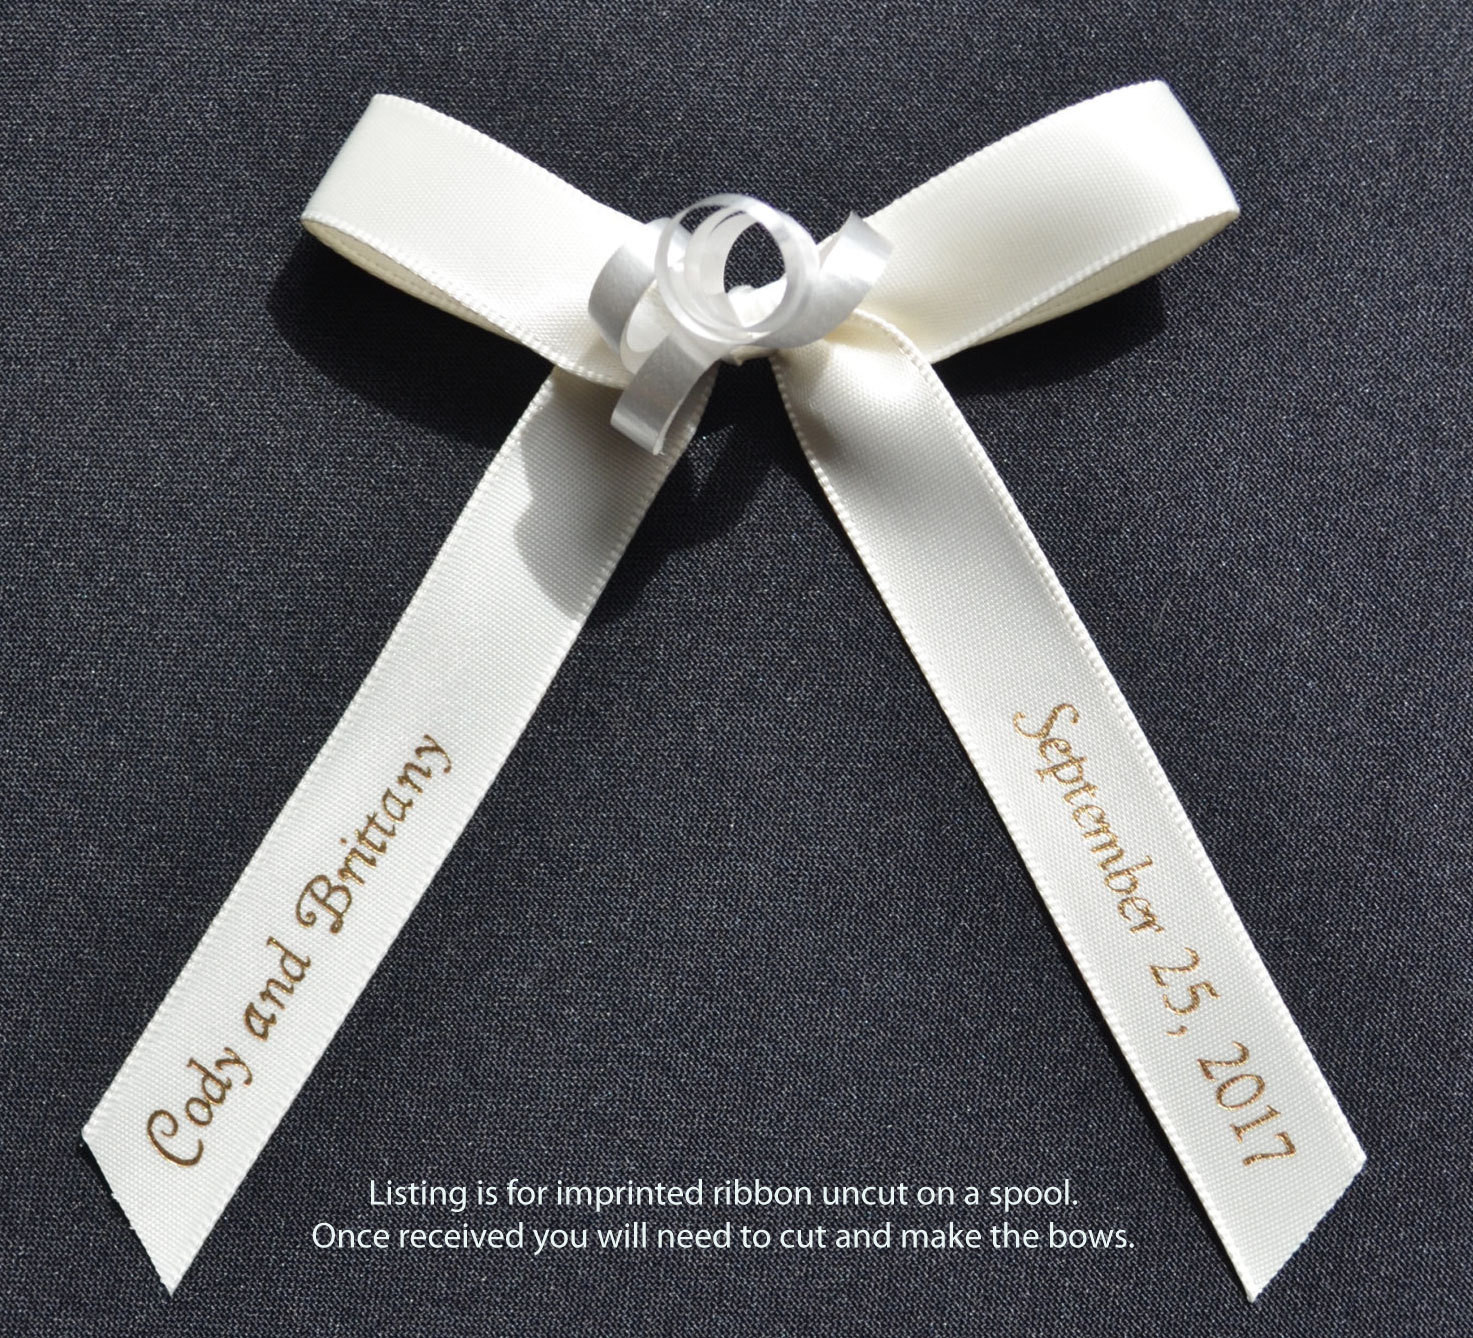 Personalized Ribbon For Wedding Favors
 100 Personalized 5 8 Satin Ribbons for Wedding Favors